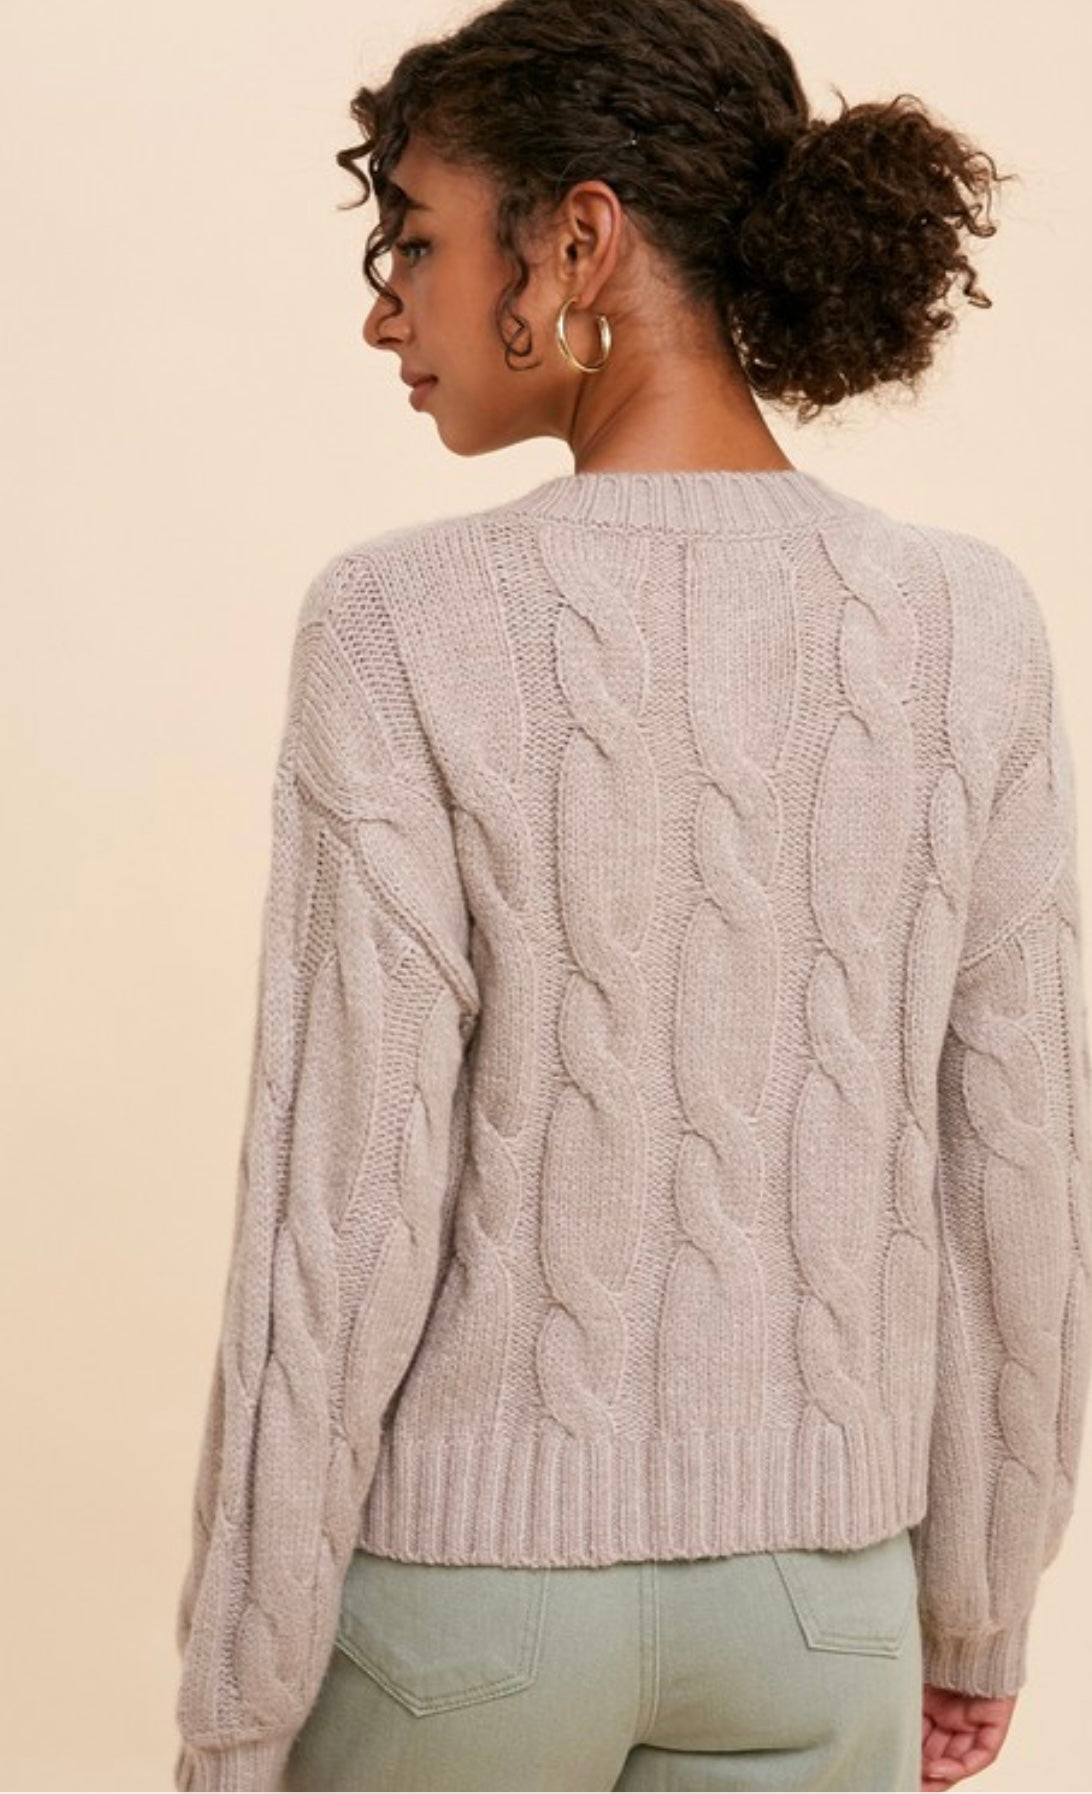 The Matilda Floral Sweater in Taupe